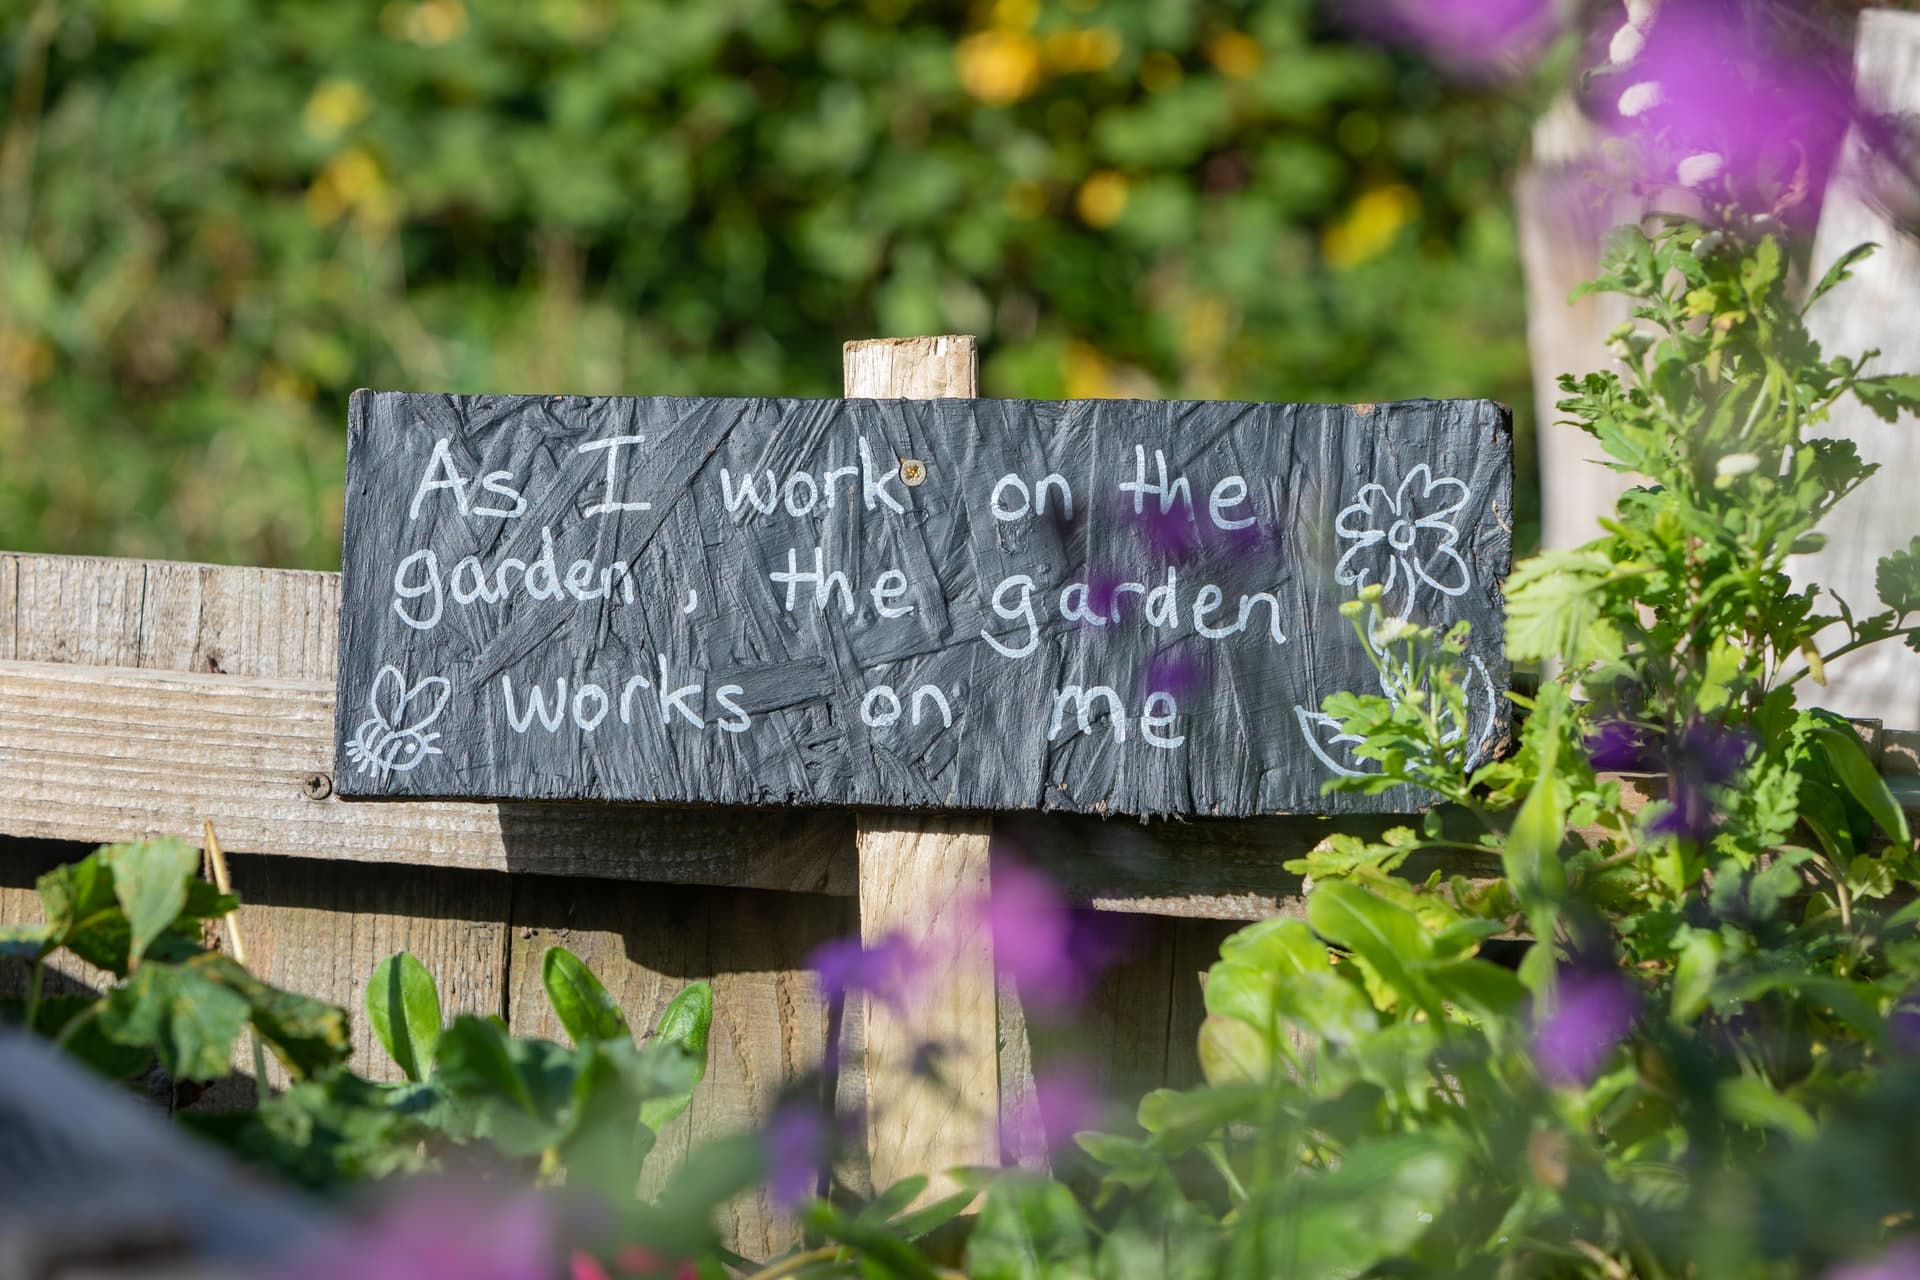 garden works on me - mental health and environment